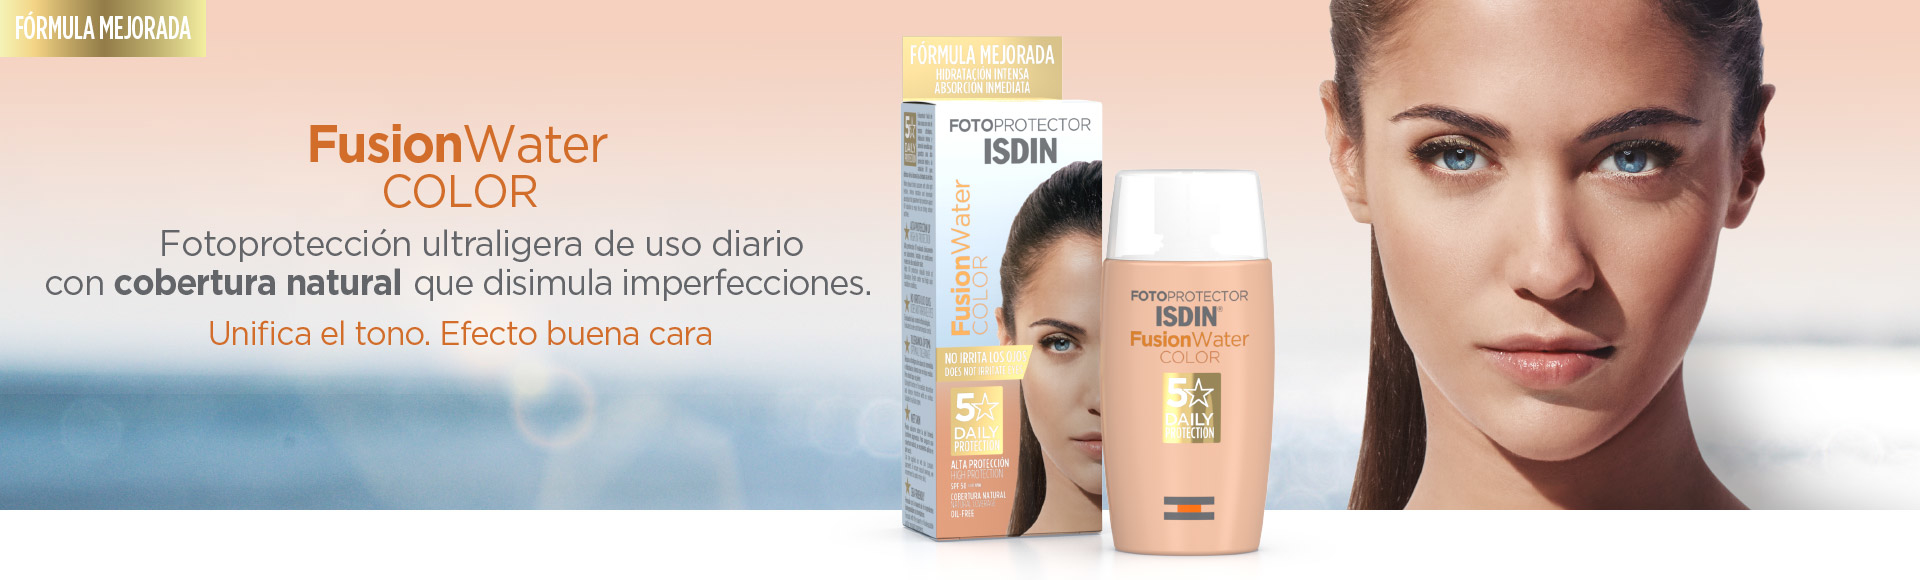 Fotoprotector ISDIN Fusion Water COLOR SPF 50, Fotoprotector ISDIN Fusion Water COLOR SPF 50 comprar, Fotoprotector ISDIN Fusion Water COLOR SPF 50 opiniones, Fotoprotector ISDIN Fusion Water COLOR SPF 50 precio